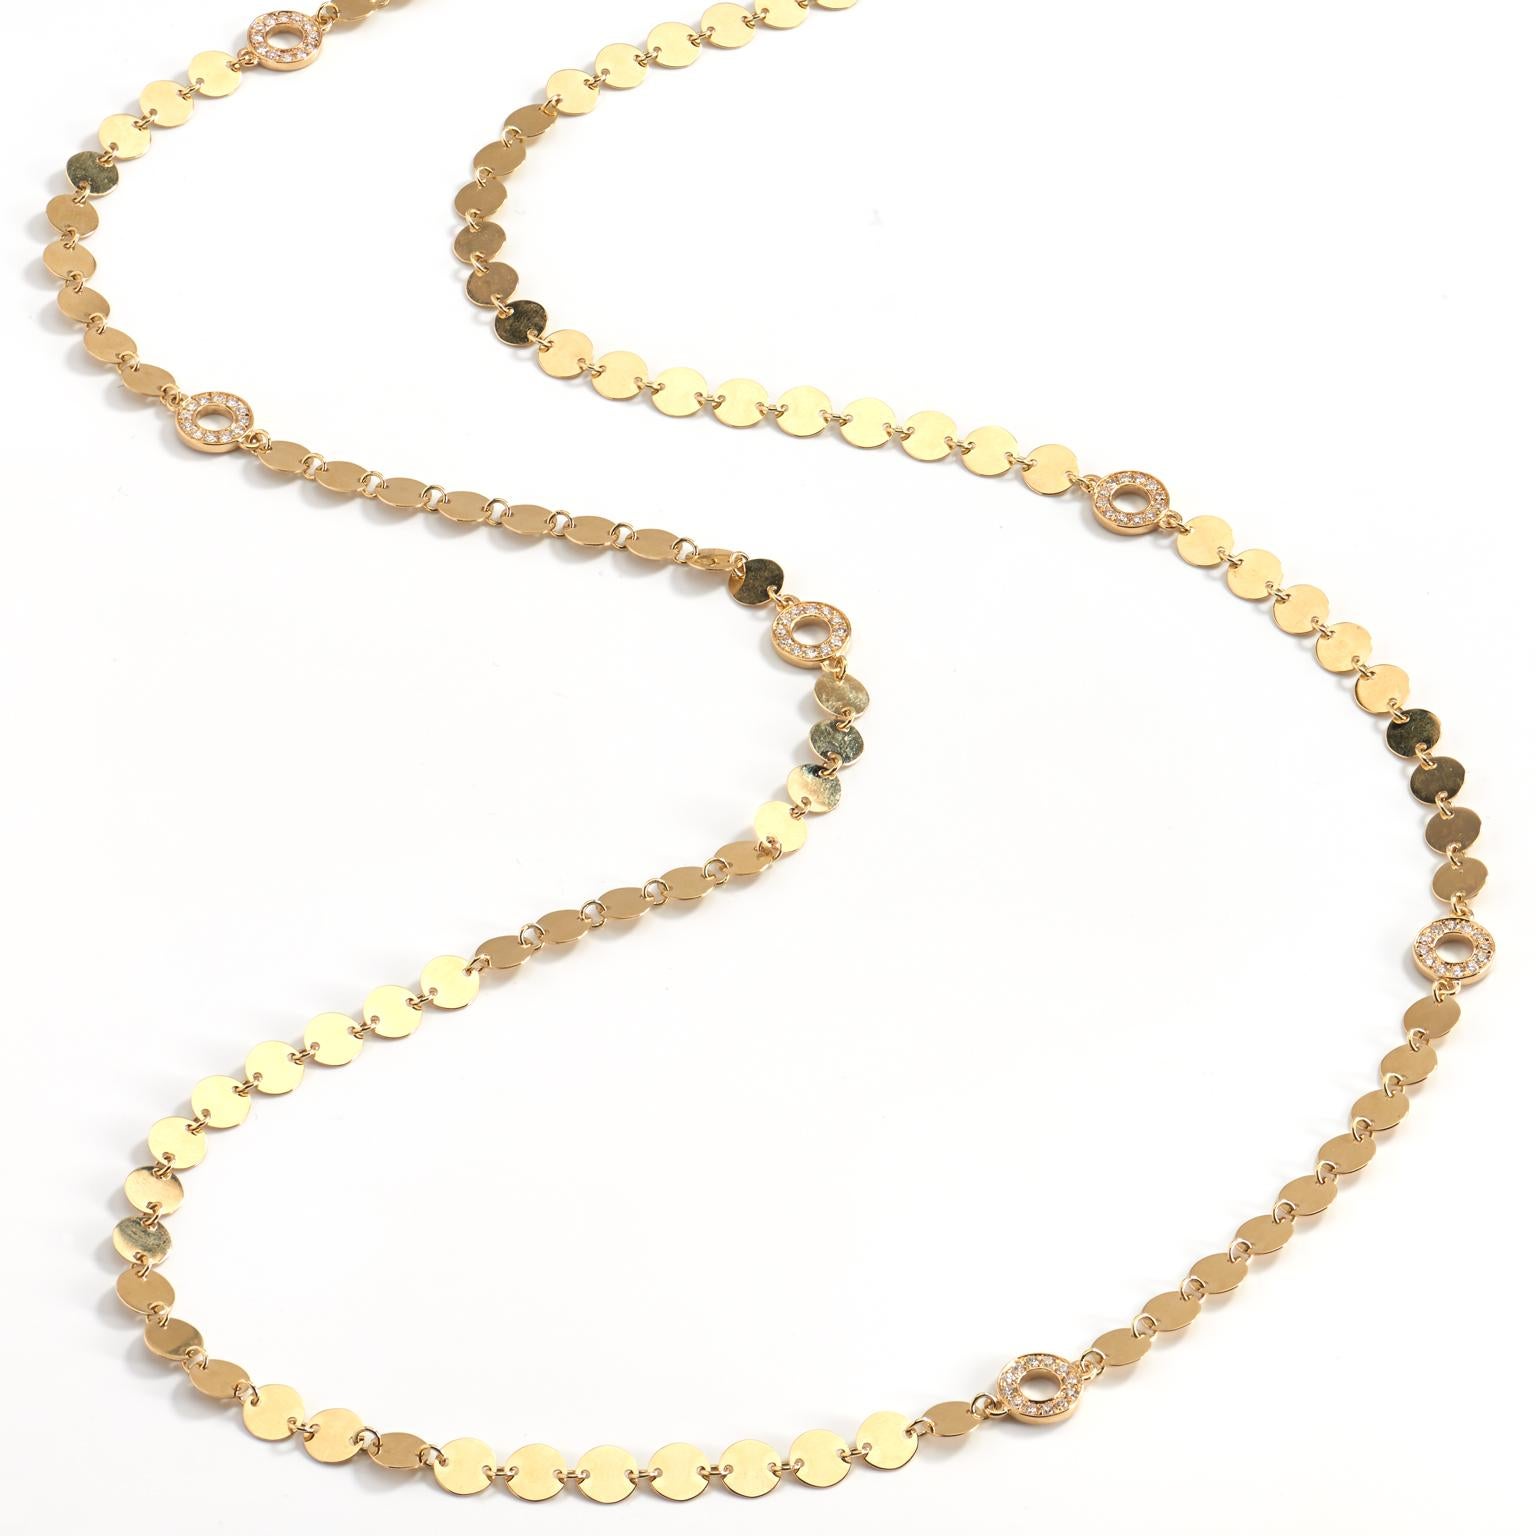 Let your playful side shine with the help of six pave-set diamond dials with a total weight of 1.55 carats dancing, accompanied by 14 karat yellow gold round discs, held together in a 33 inch necklace.